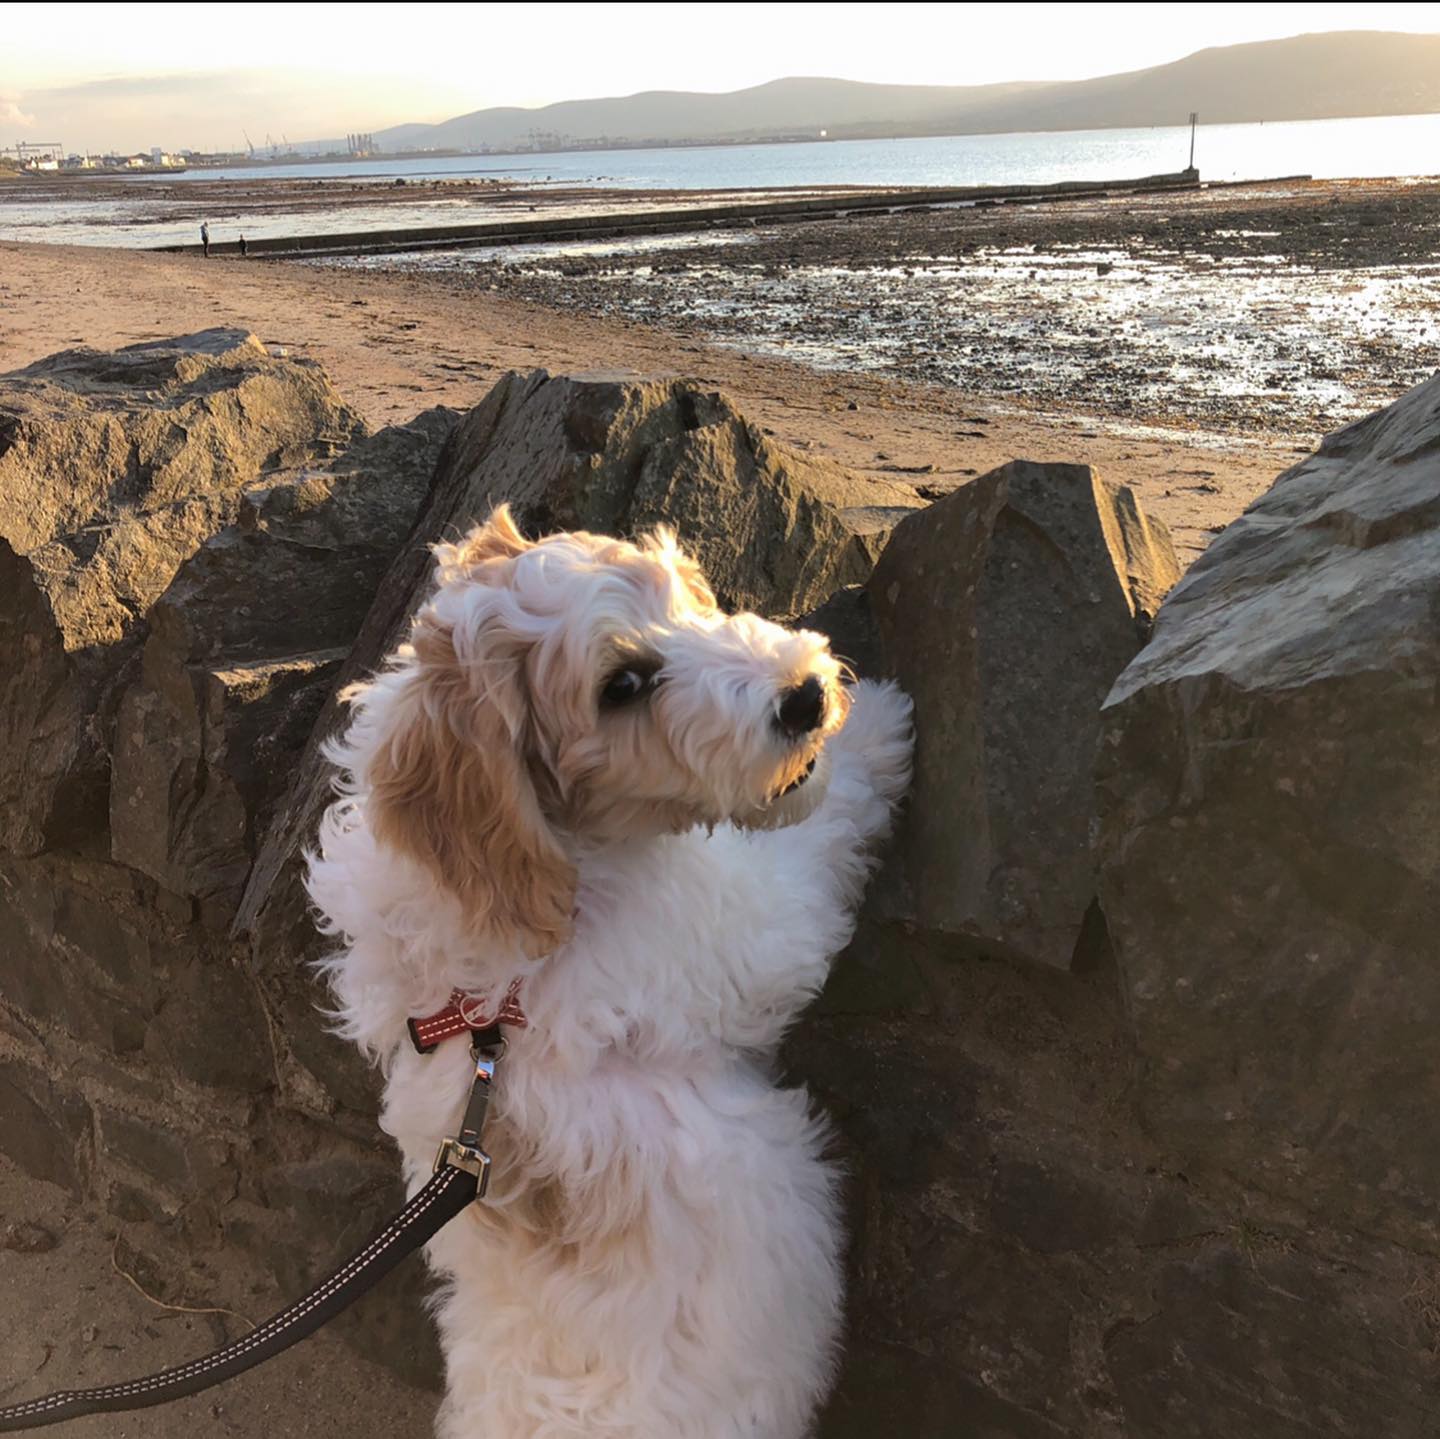 Alfie has been with us for 5 weeks now, he's over 14 weeks old. Lots of adventures this week, especially loving the beach. We've been to Crawfordsburn, Seapark, Ballycastle and Portrush . He loves to paddle, greet other dogs (the dog owner’s community are such a friendly group) but also happy just playing in the garden. Looking forward to more walks and adventures